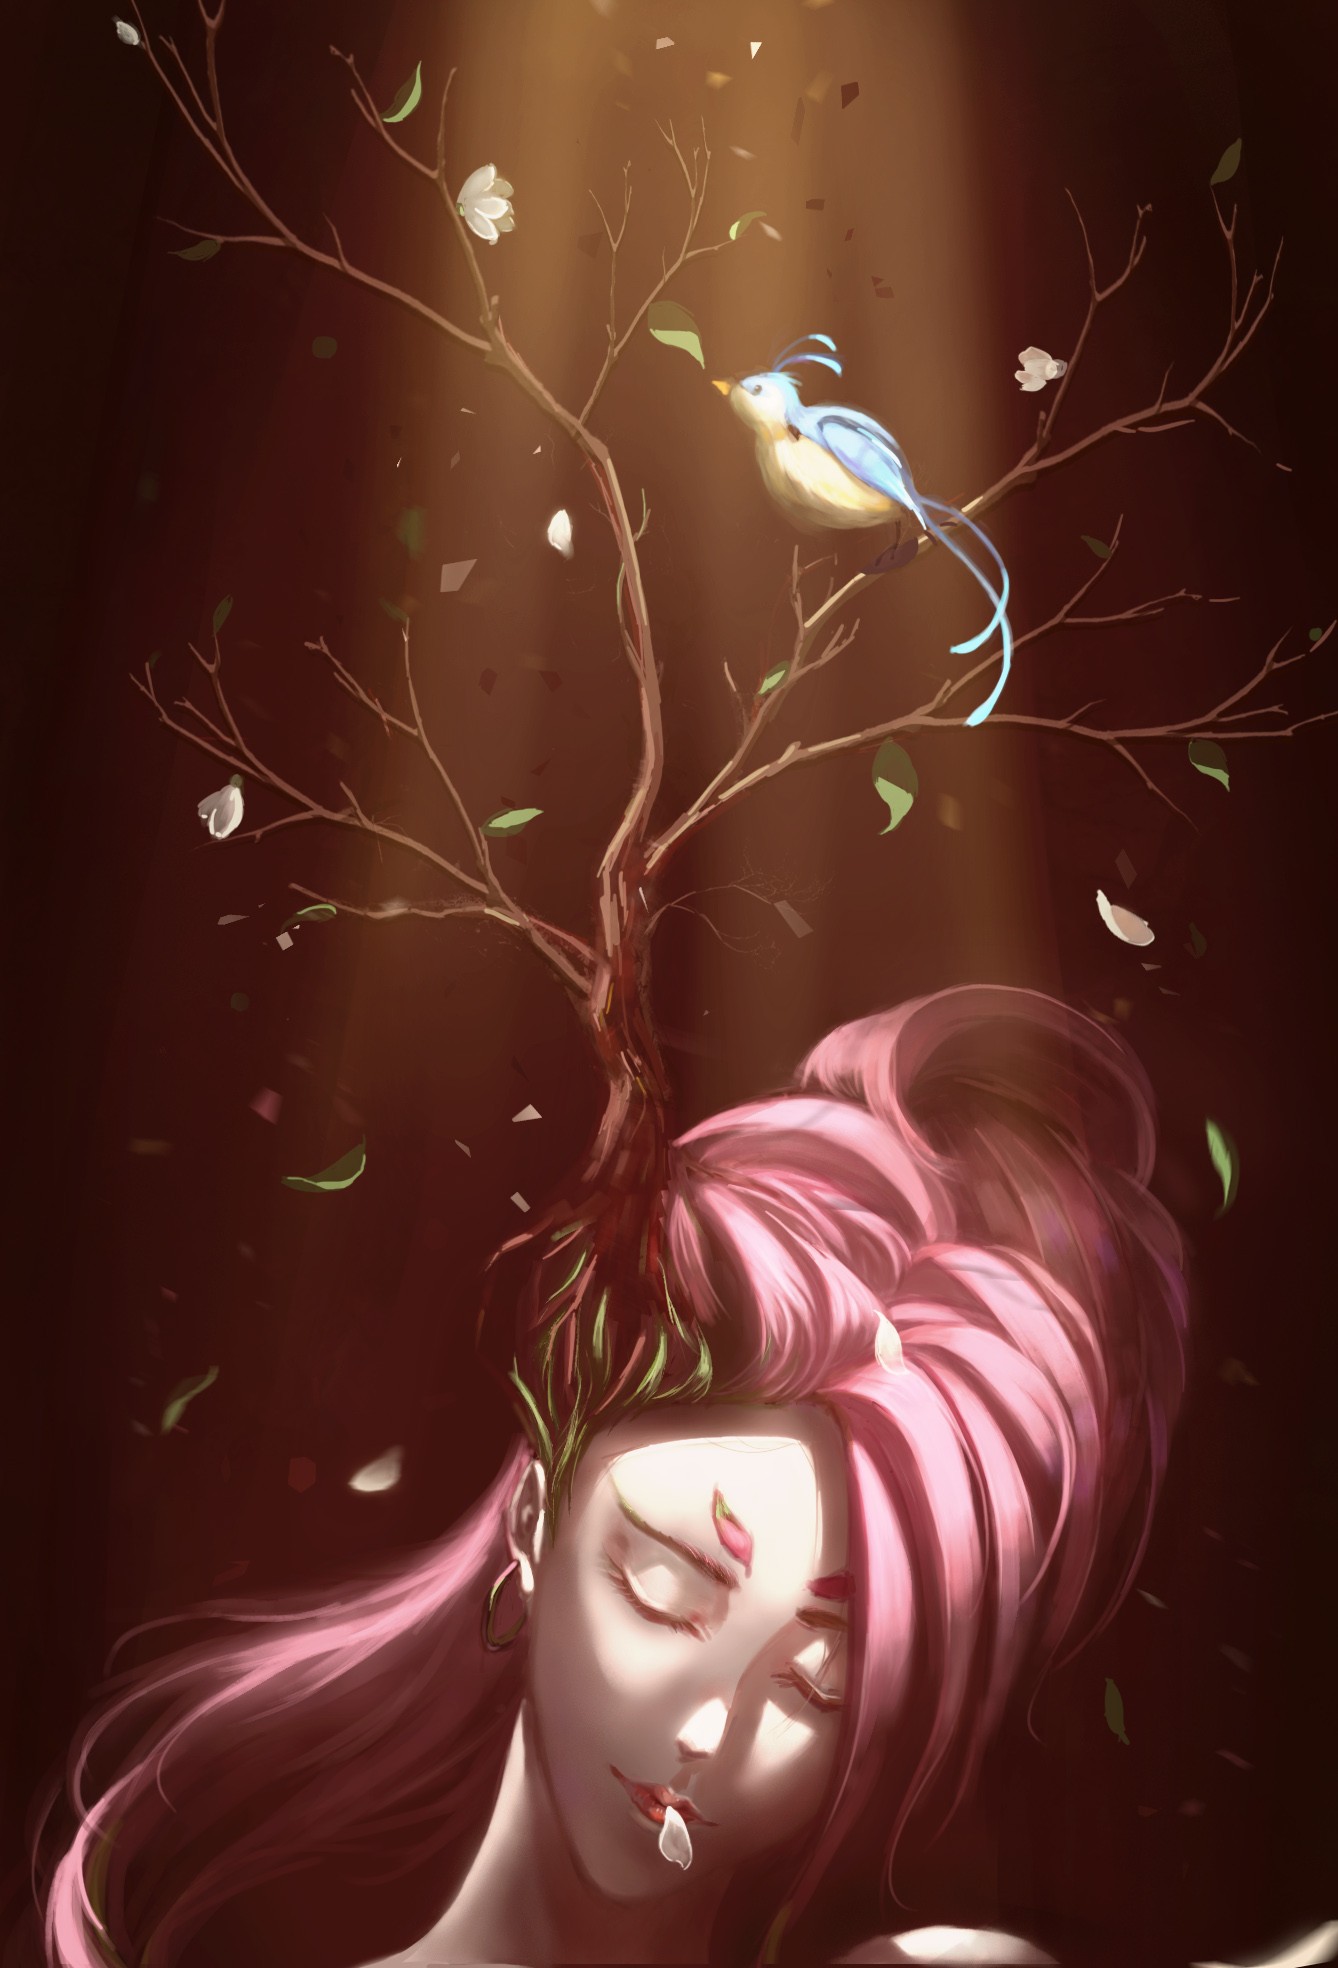 Zyra League Of Legends Wallpapers